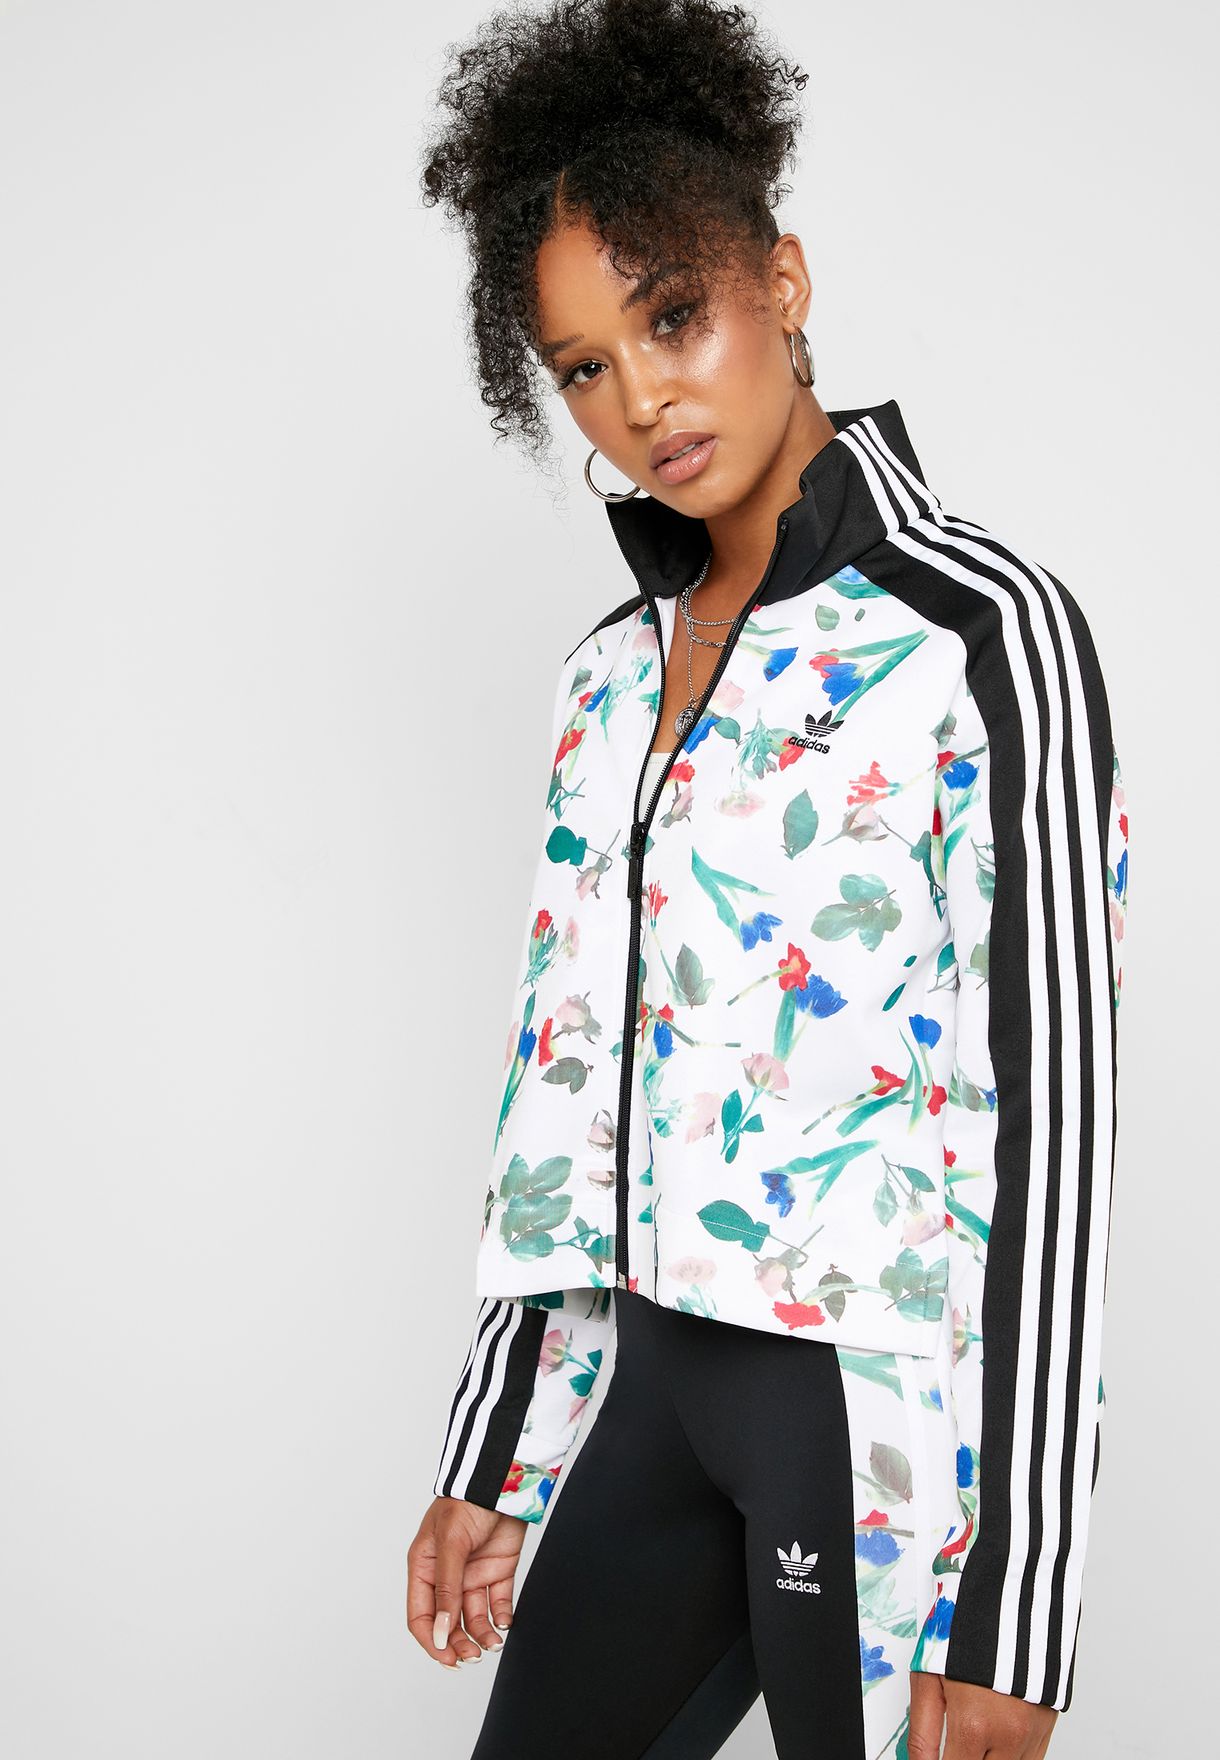 Buy adidas floral jacket women's> OFF-52%